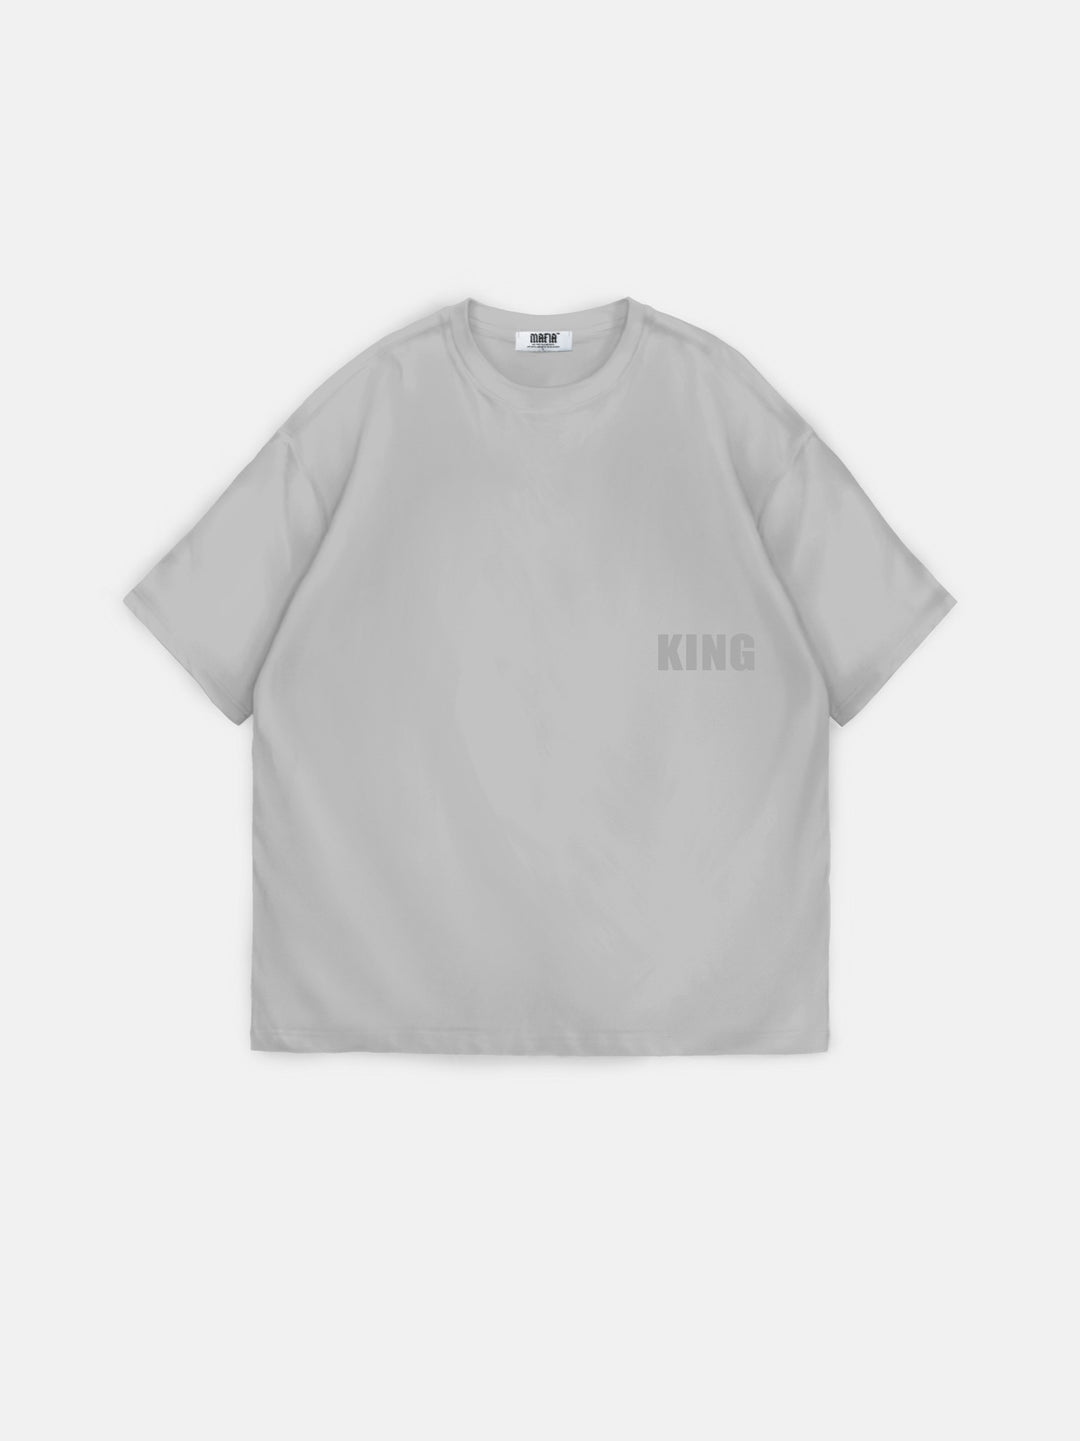 Oversize 'Fall of the King' T-shirt - Grey